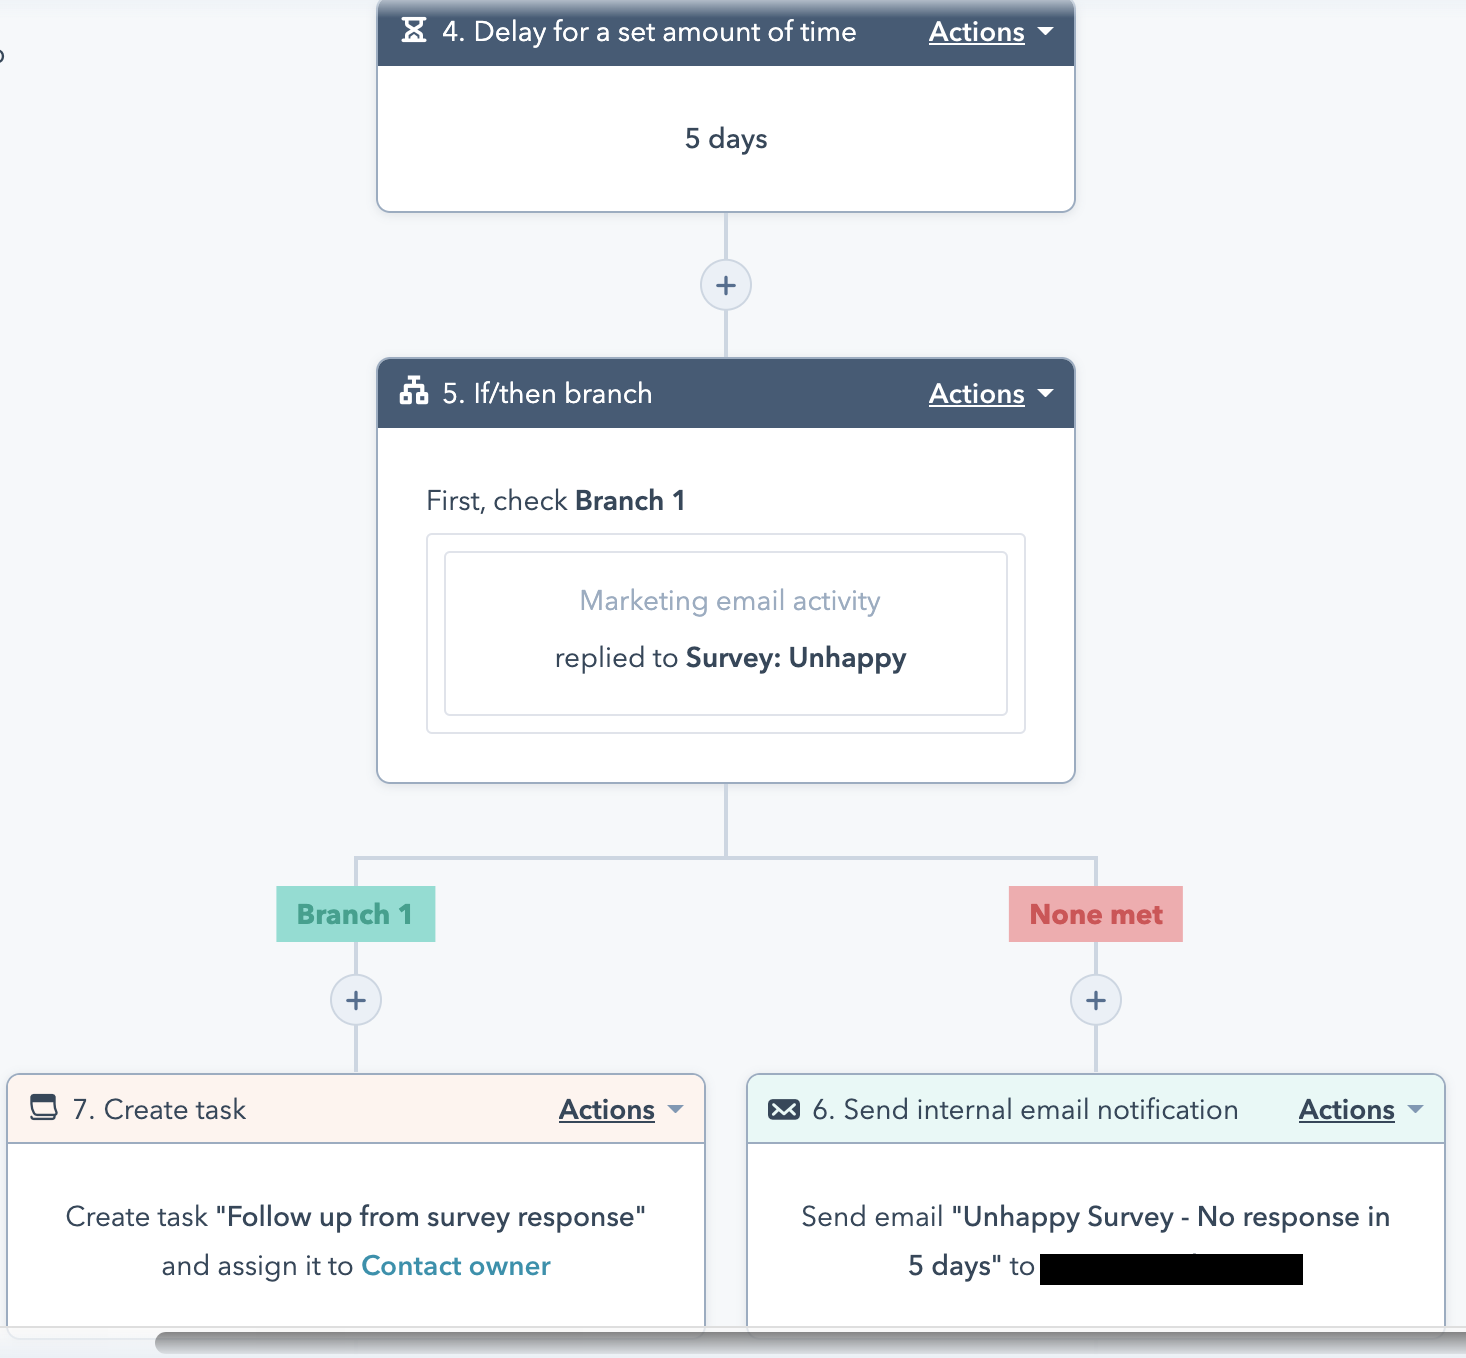 The Workflow for each individual email response to the survey